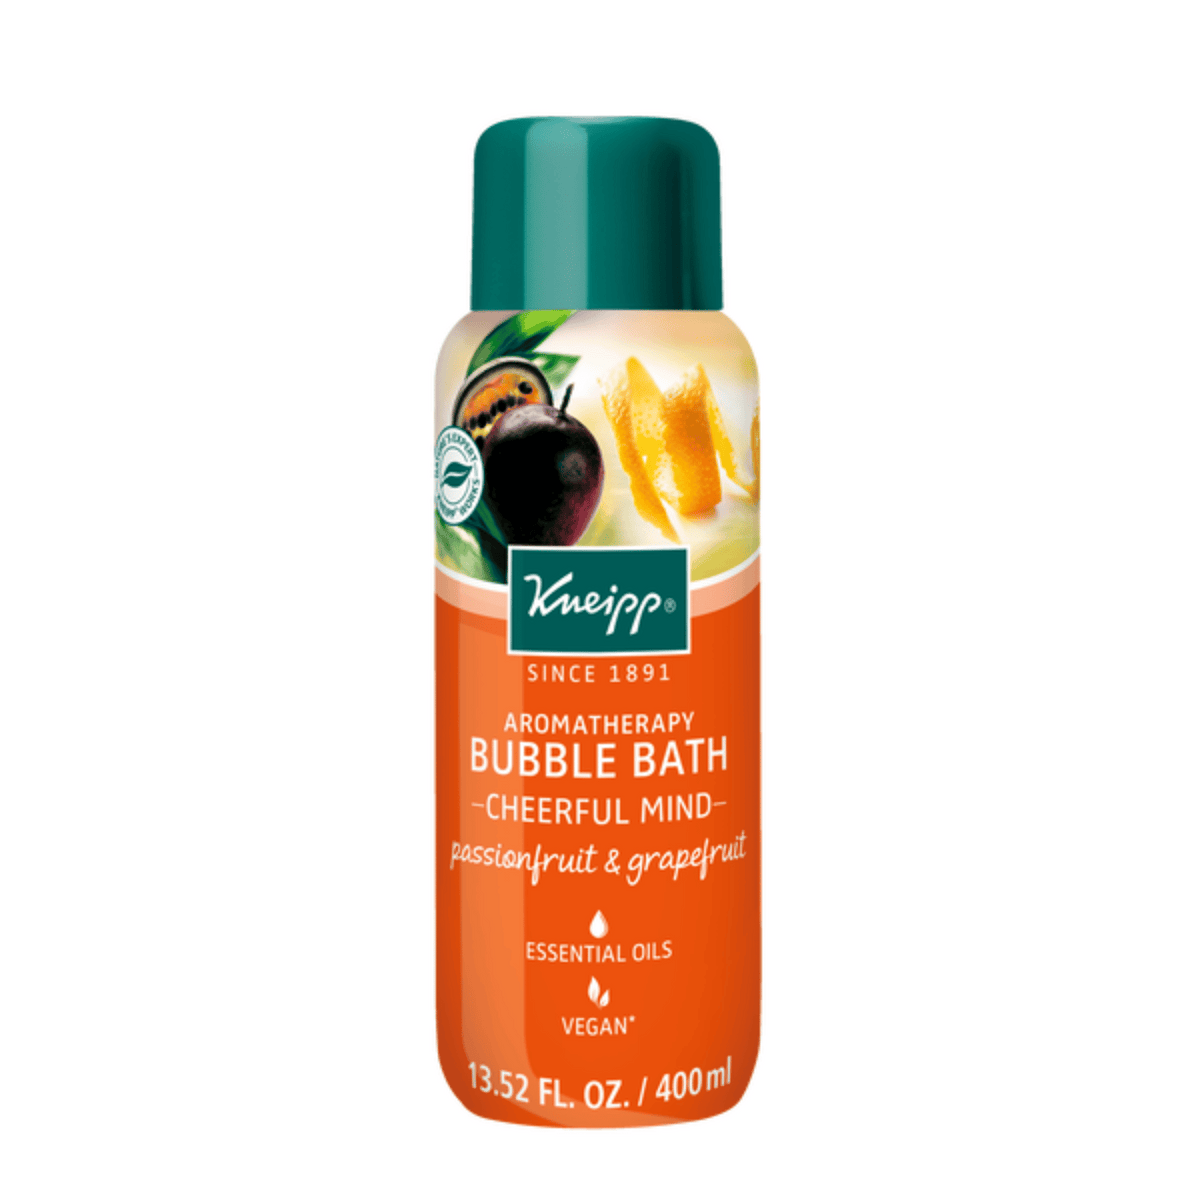 Primary Image of Passionfruit & Grapefruit Cheerful Mind Bubble Bath